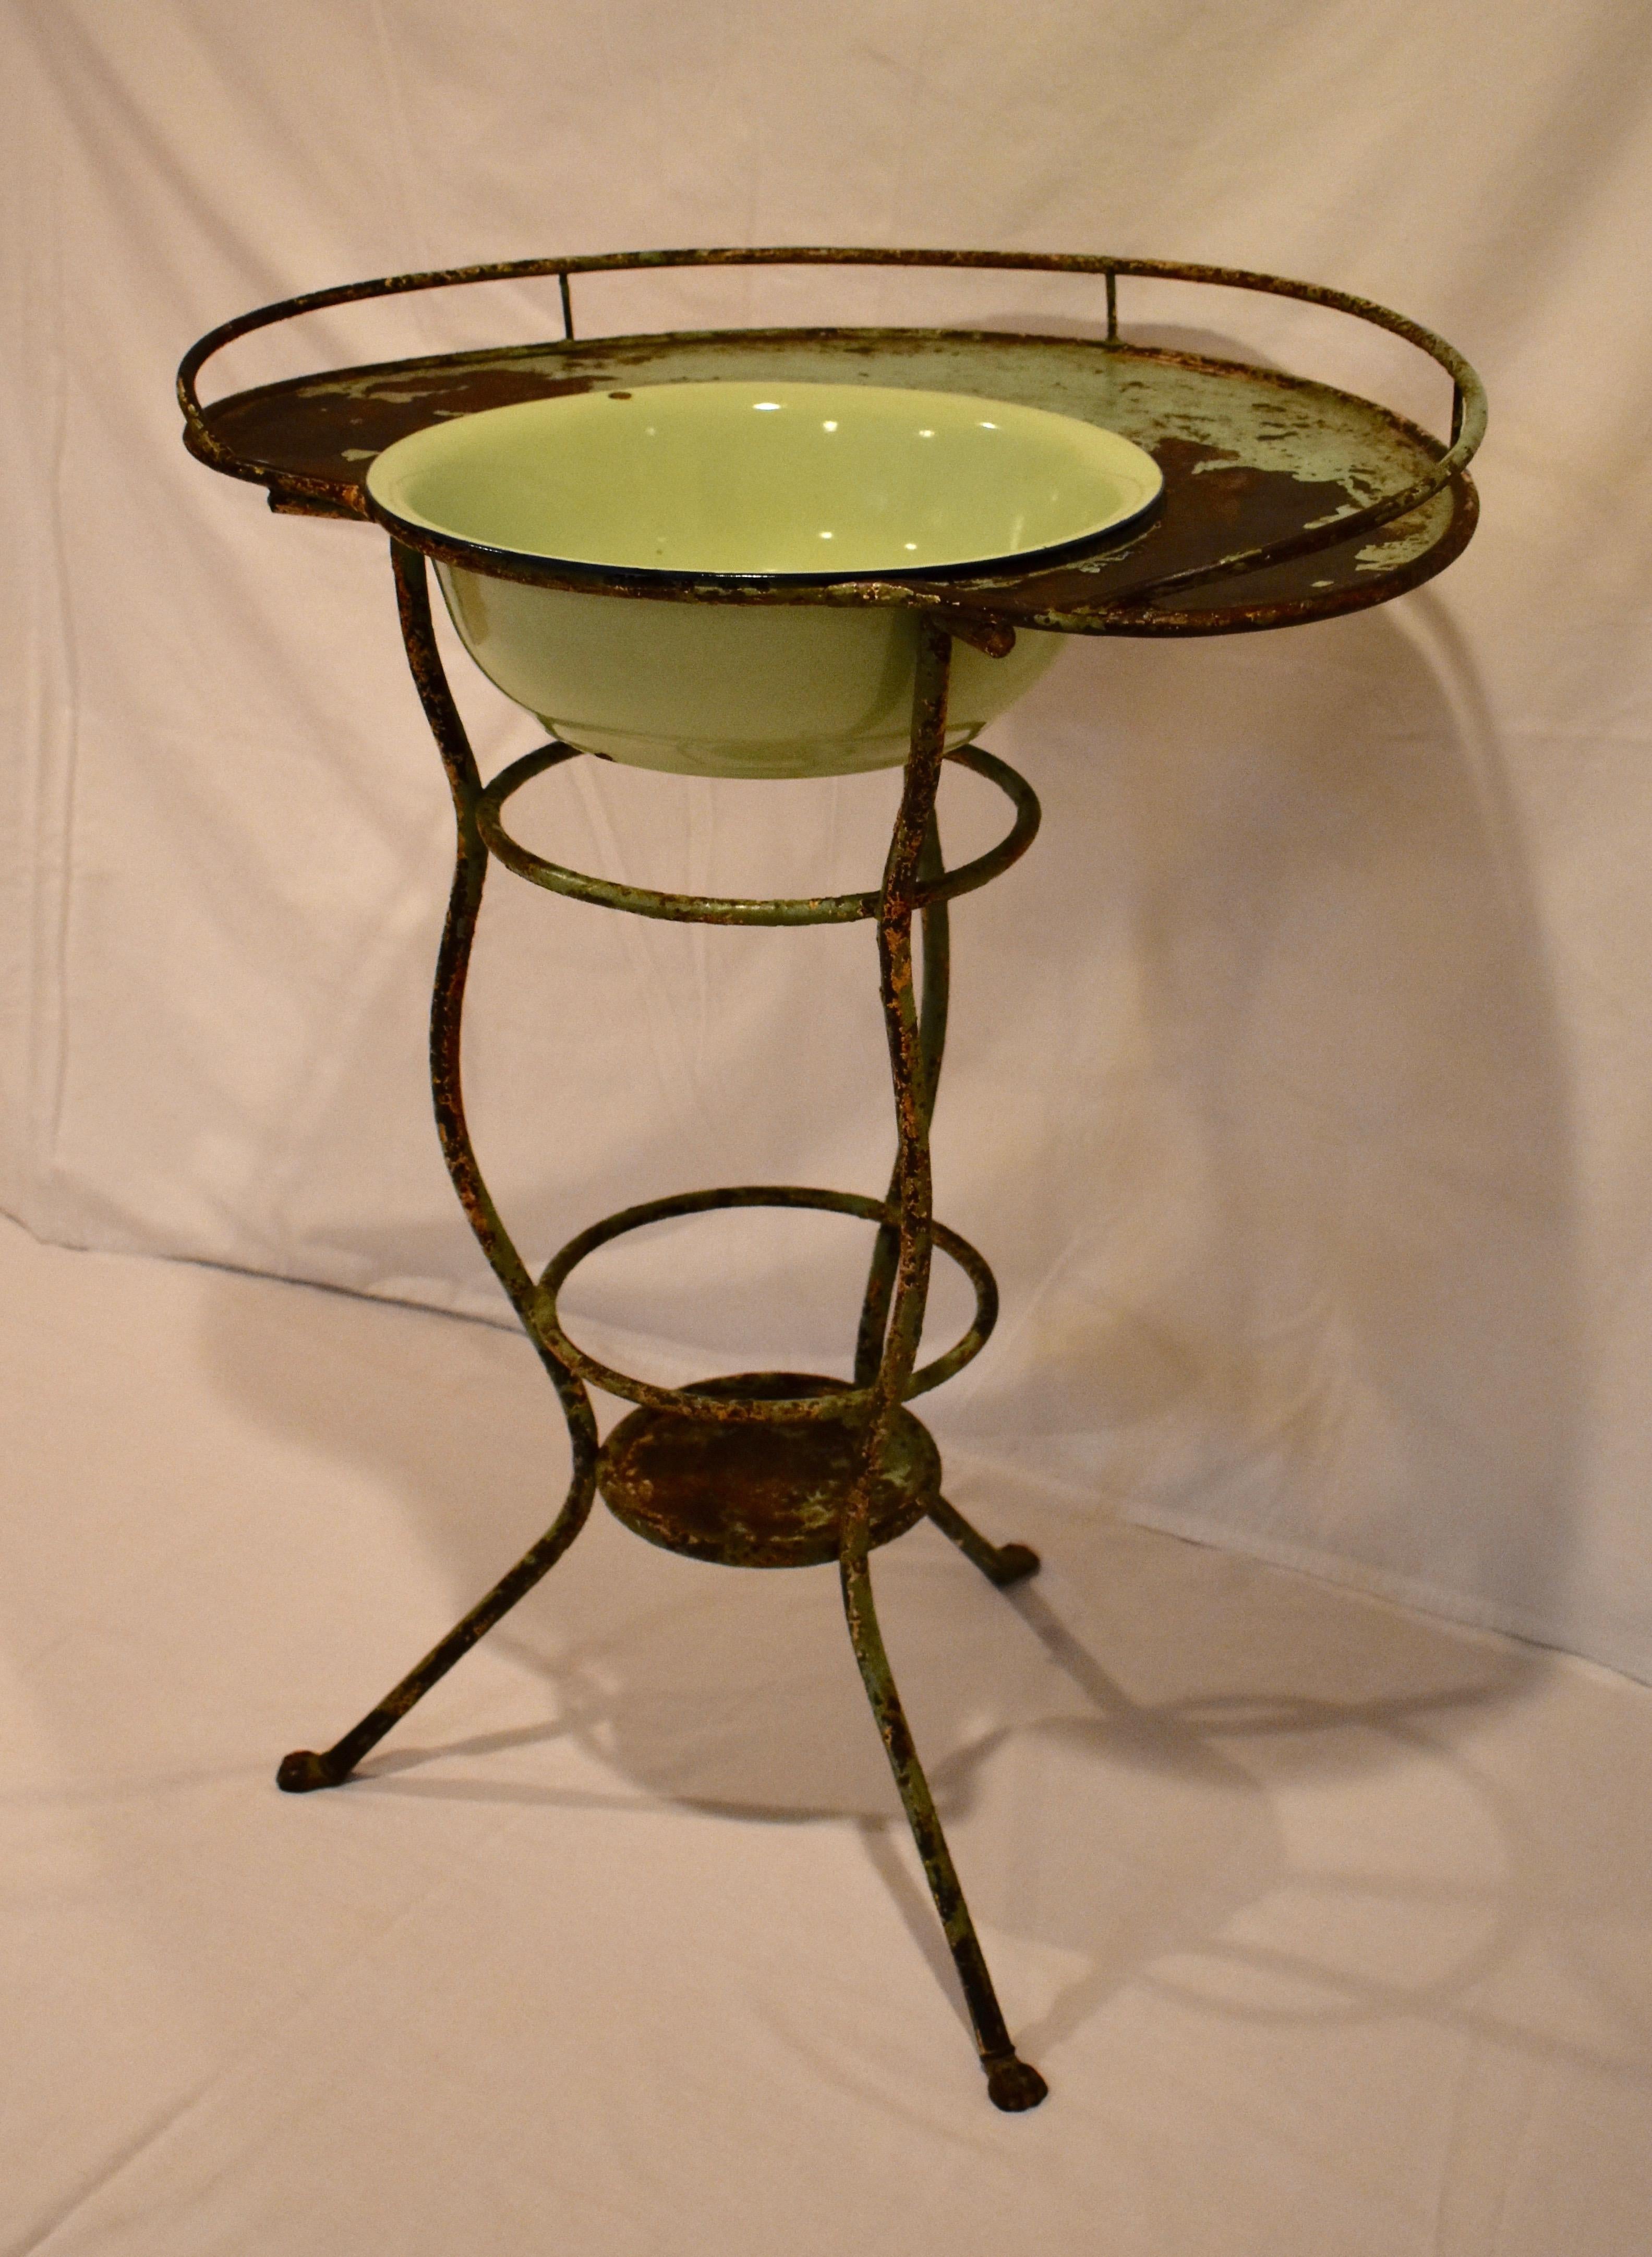 Wrought Iron Tripod Washstand with Enameled Copper Bowl In Good Condition For Sale In Baltimore, MD